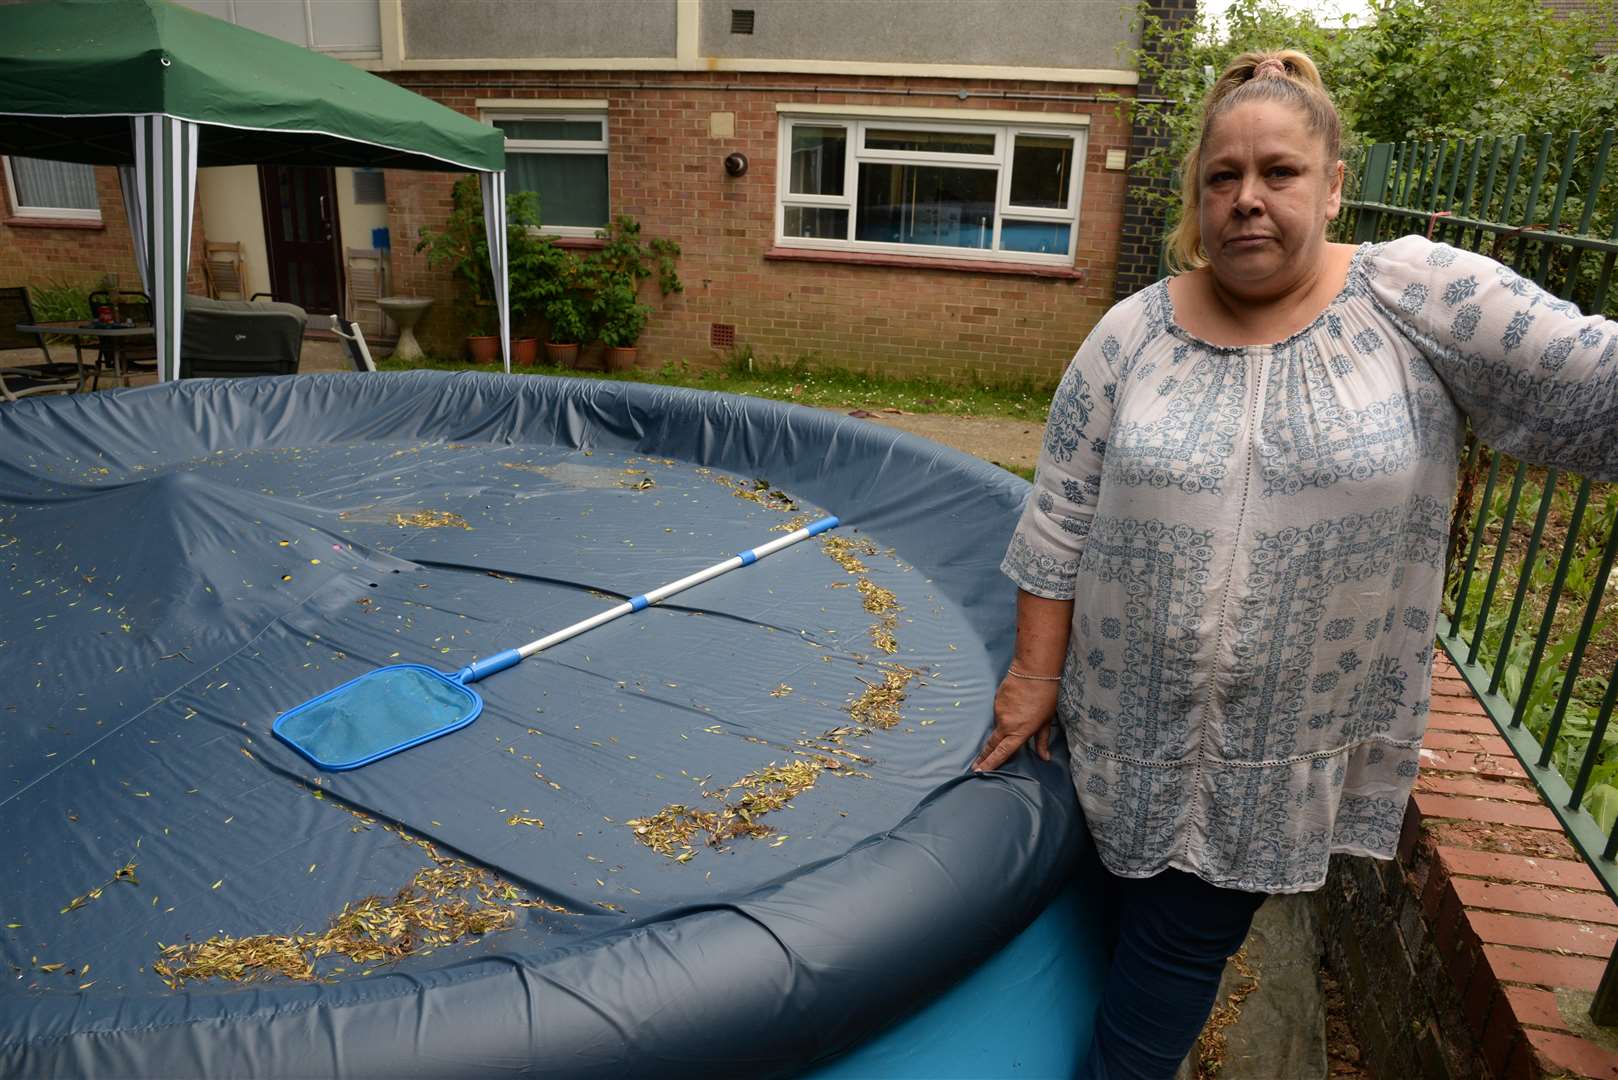 mhs Homes told Marian Young a burglar could down in the pool